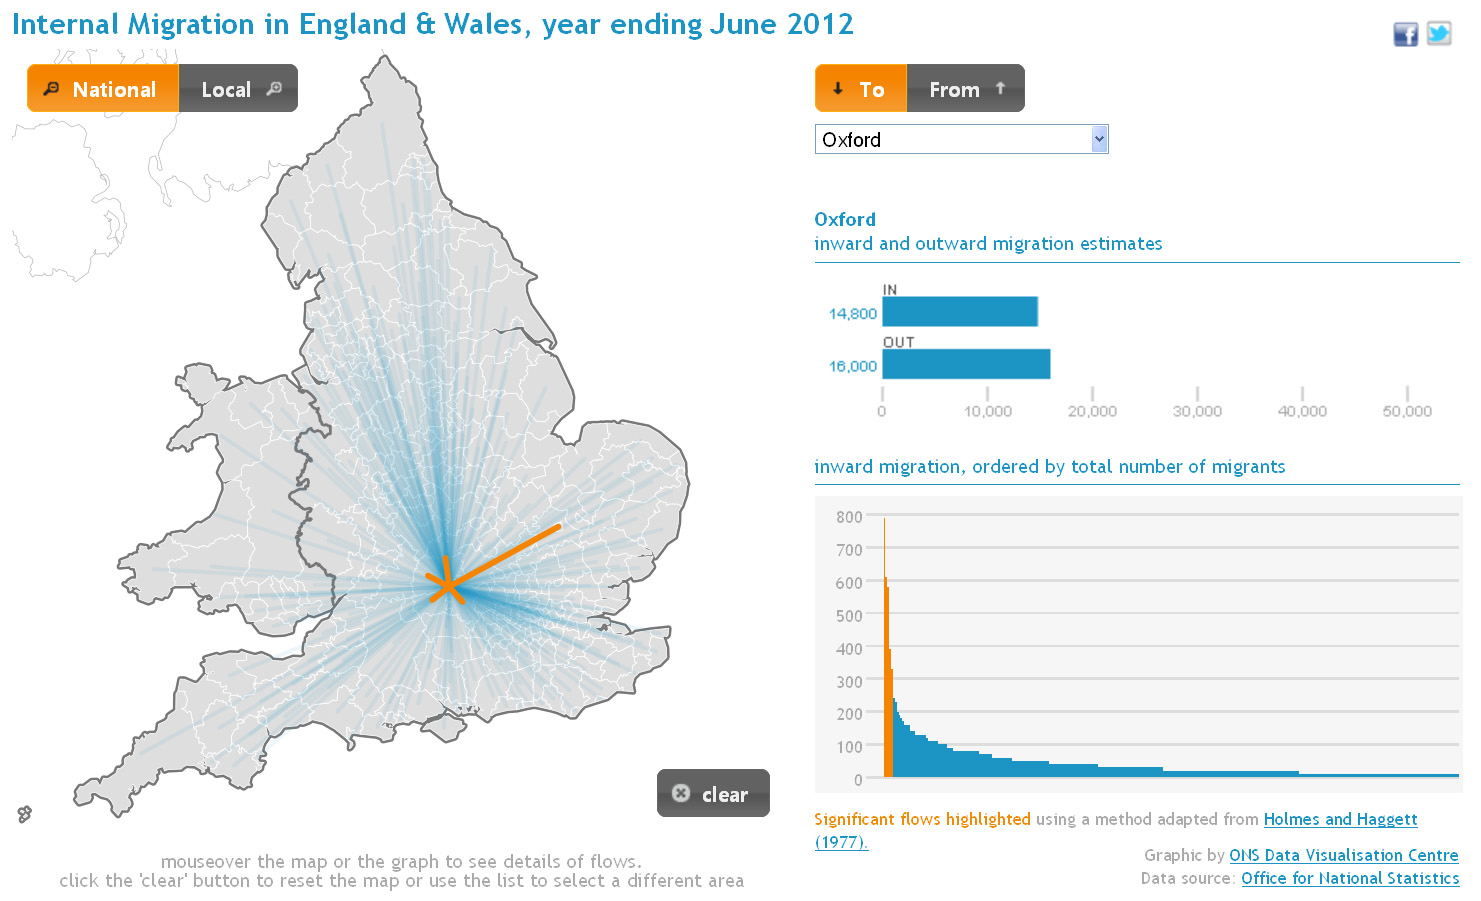 Internal Migration in England and Wales, year ending 2012 interactive map